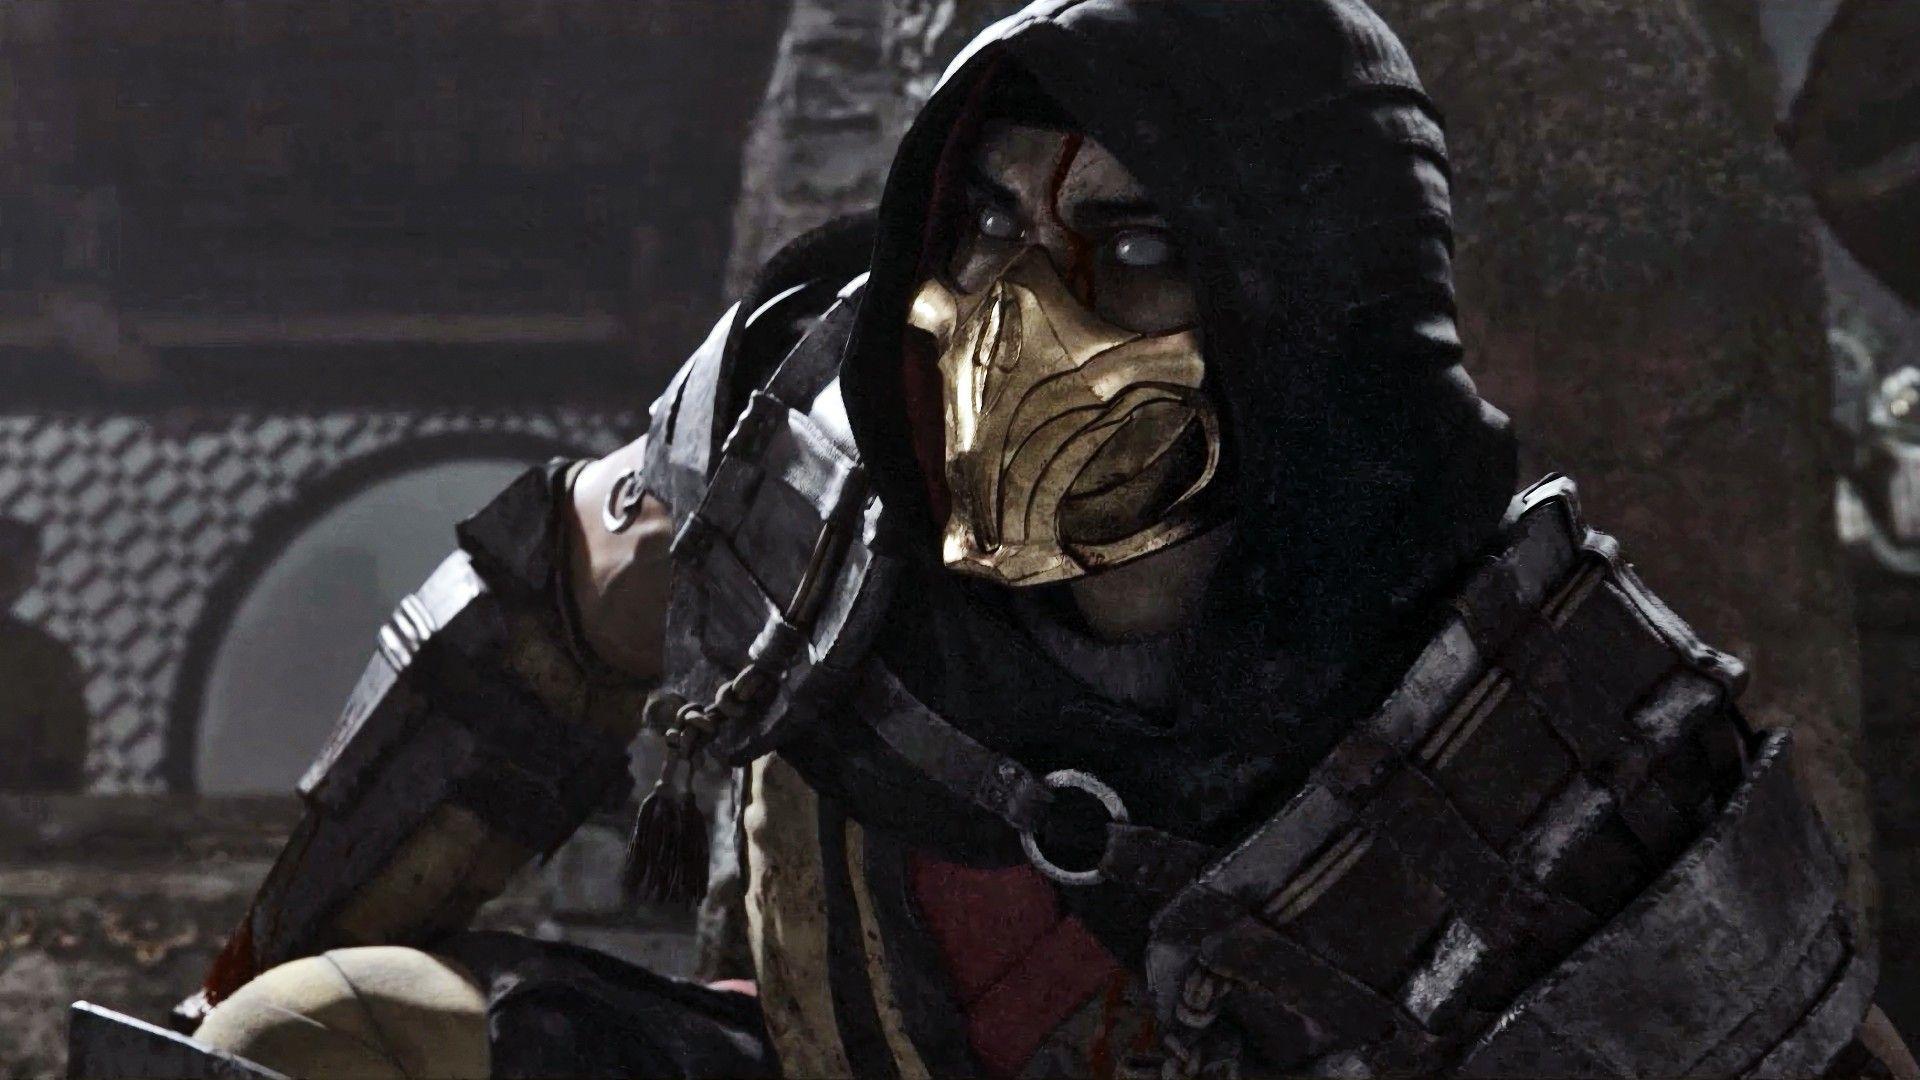 Cool Mk11 Scorpion Wallpapers Top Free Cool Mk11 Scorpion Backgrounds